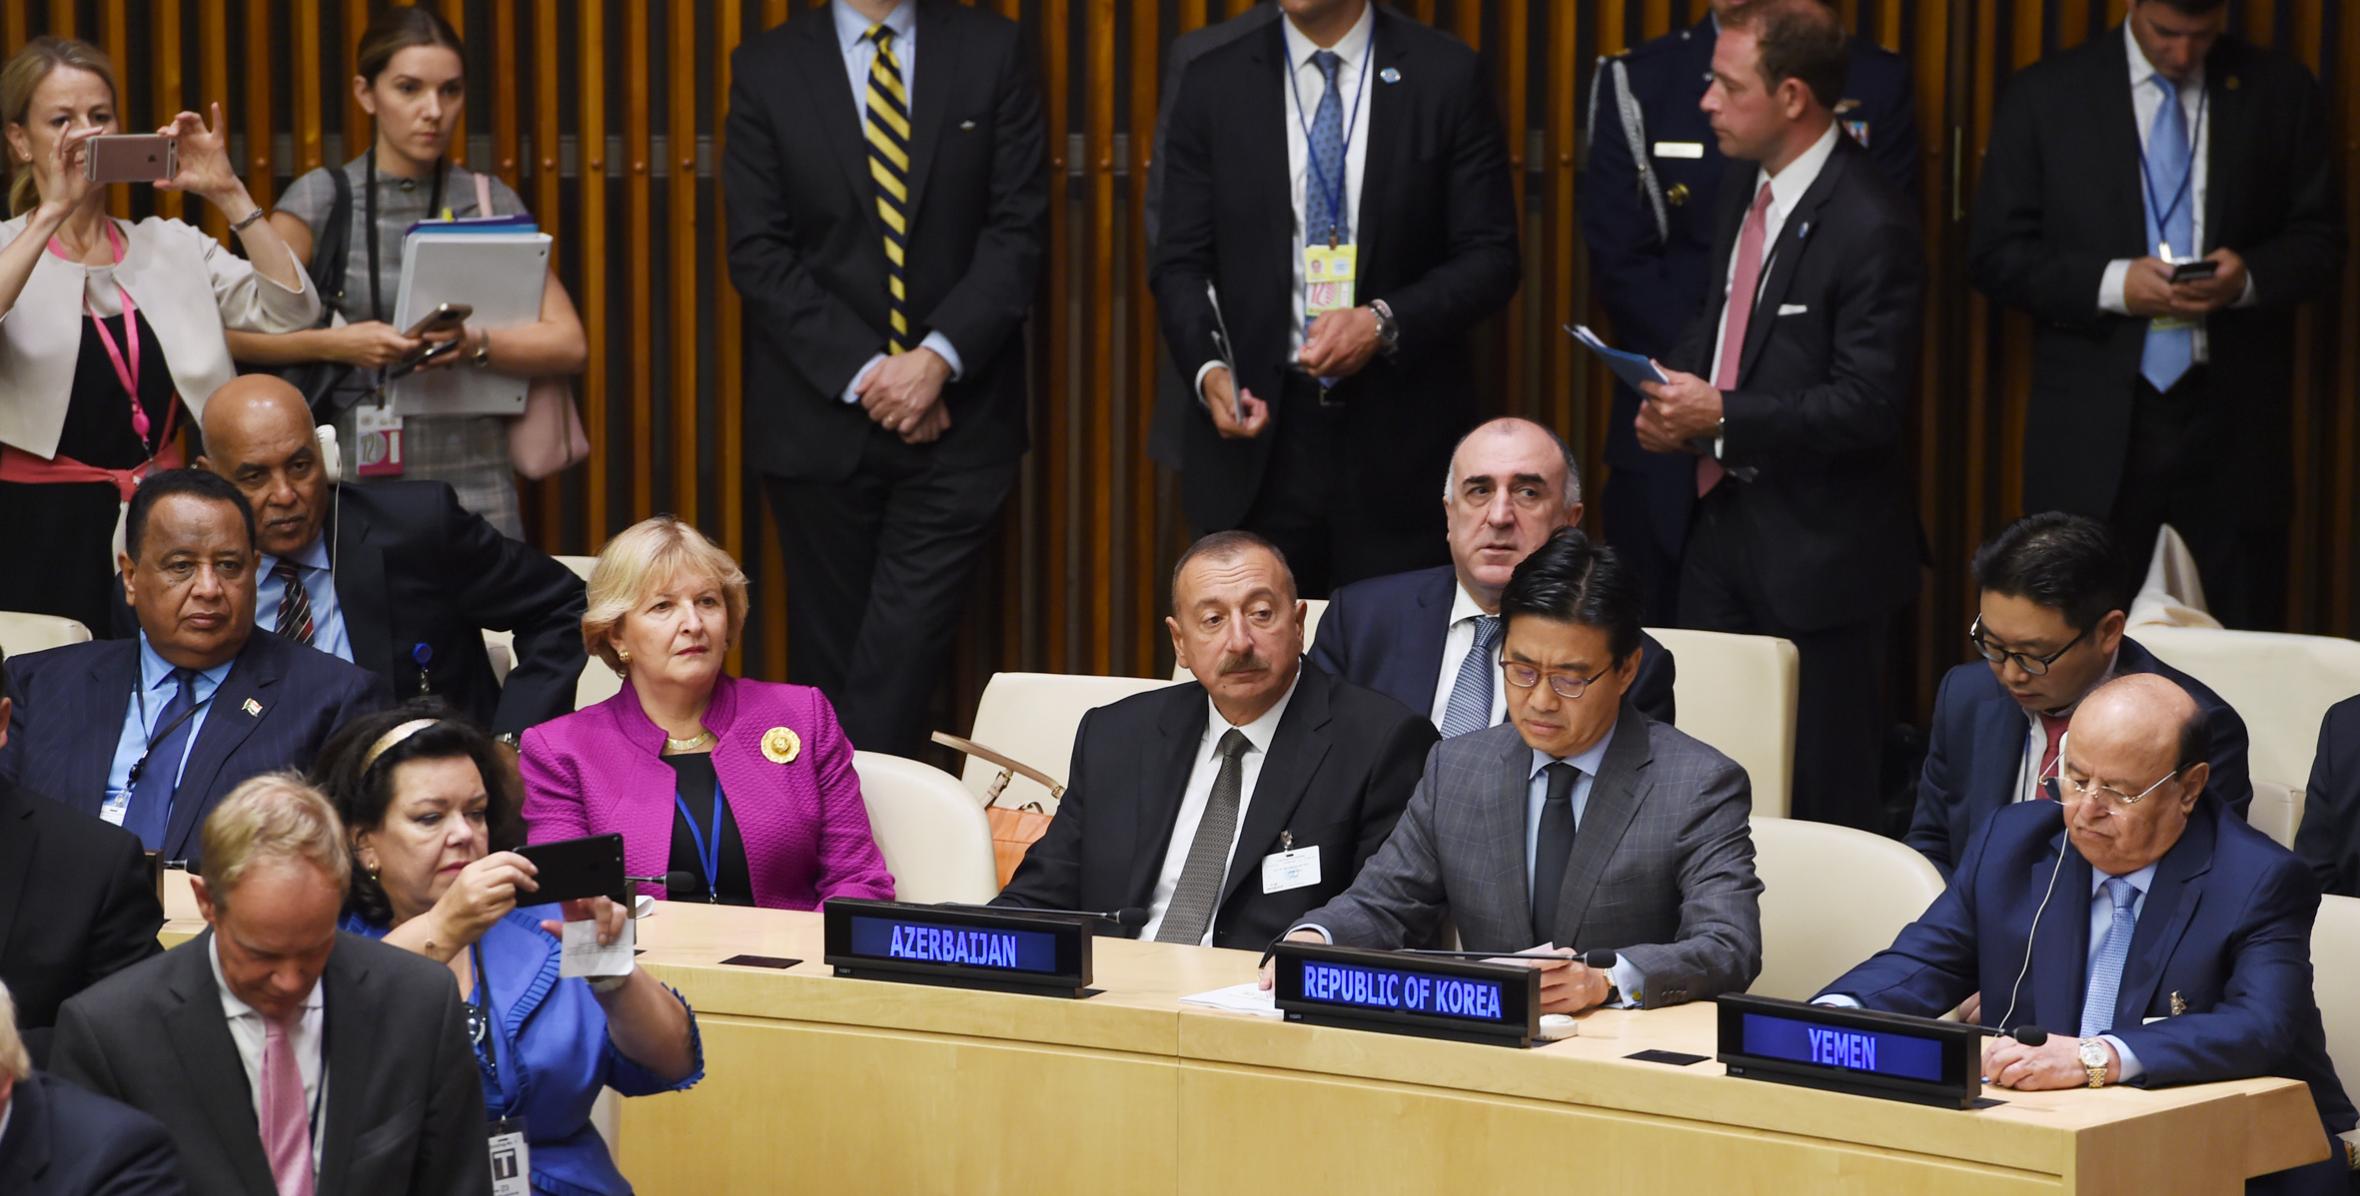 Ilham Aliyev attended Political Declaration for UN Reform High Level Event in New York